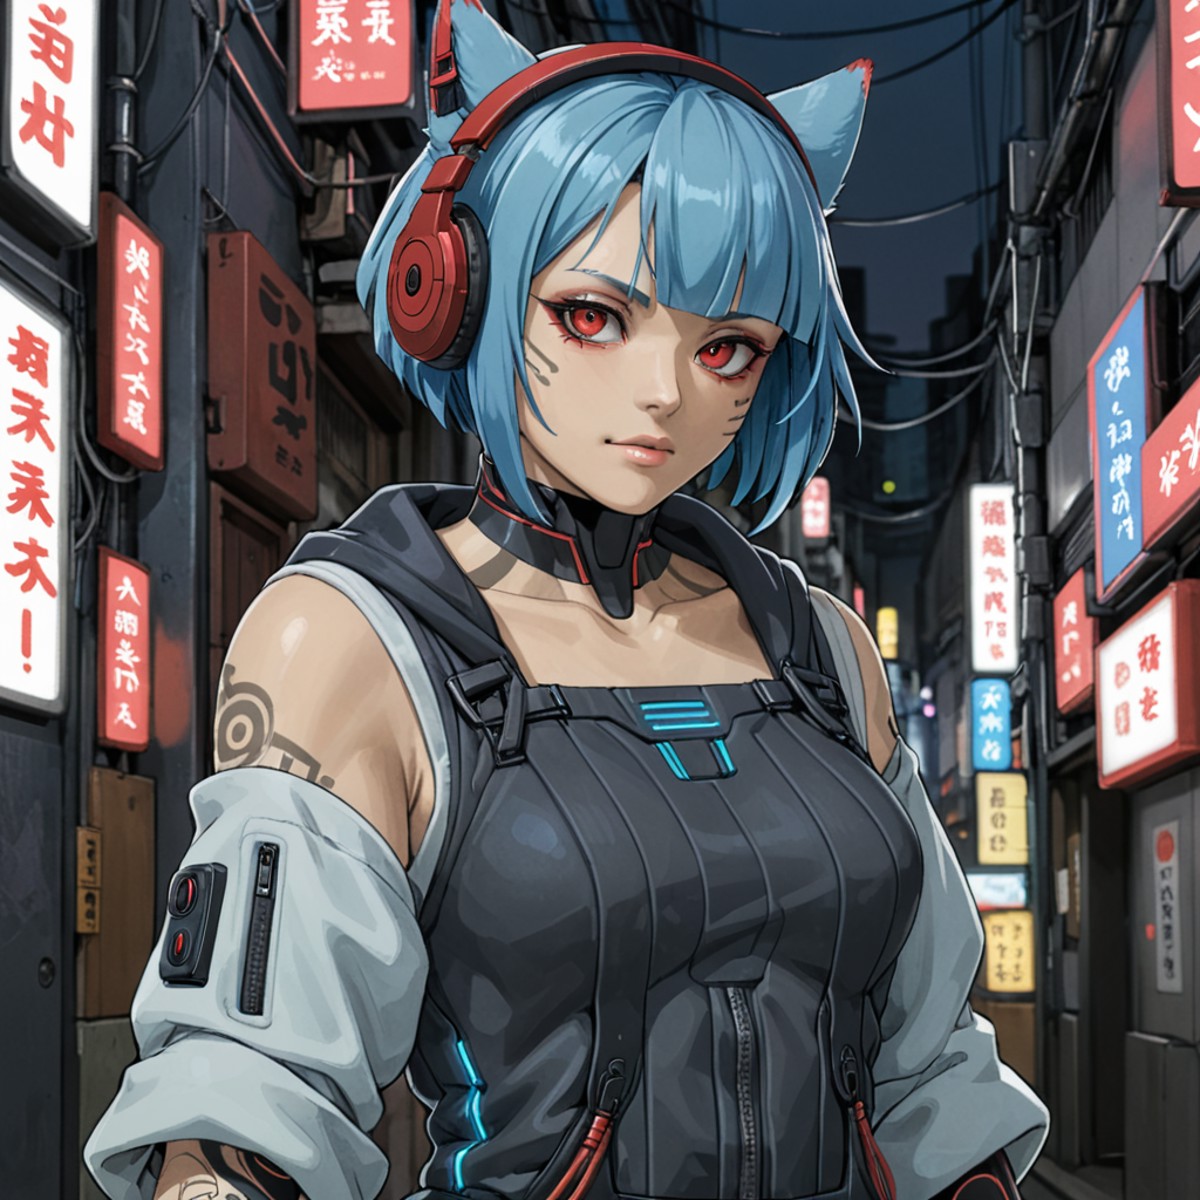 ukiyo-e woodblock of an  cyberpunk 30 year old woman red eyes and blue hair, headphone, wearing cyberpunk outfit overall